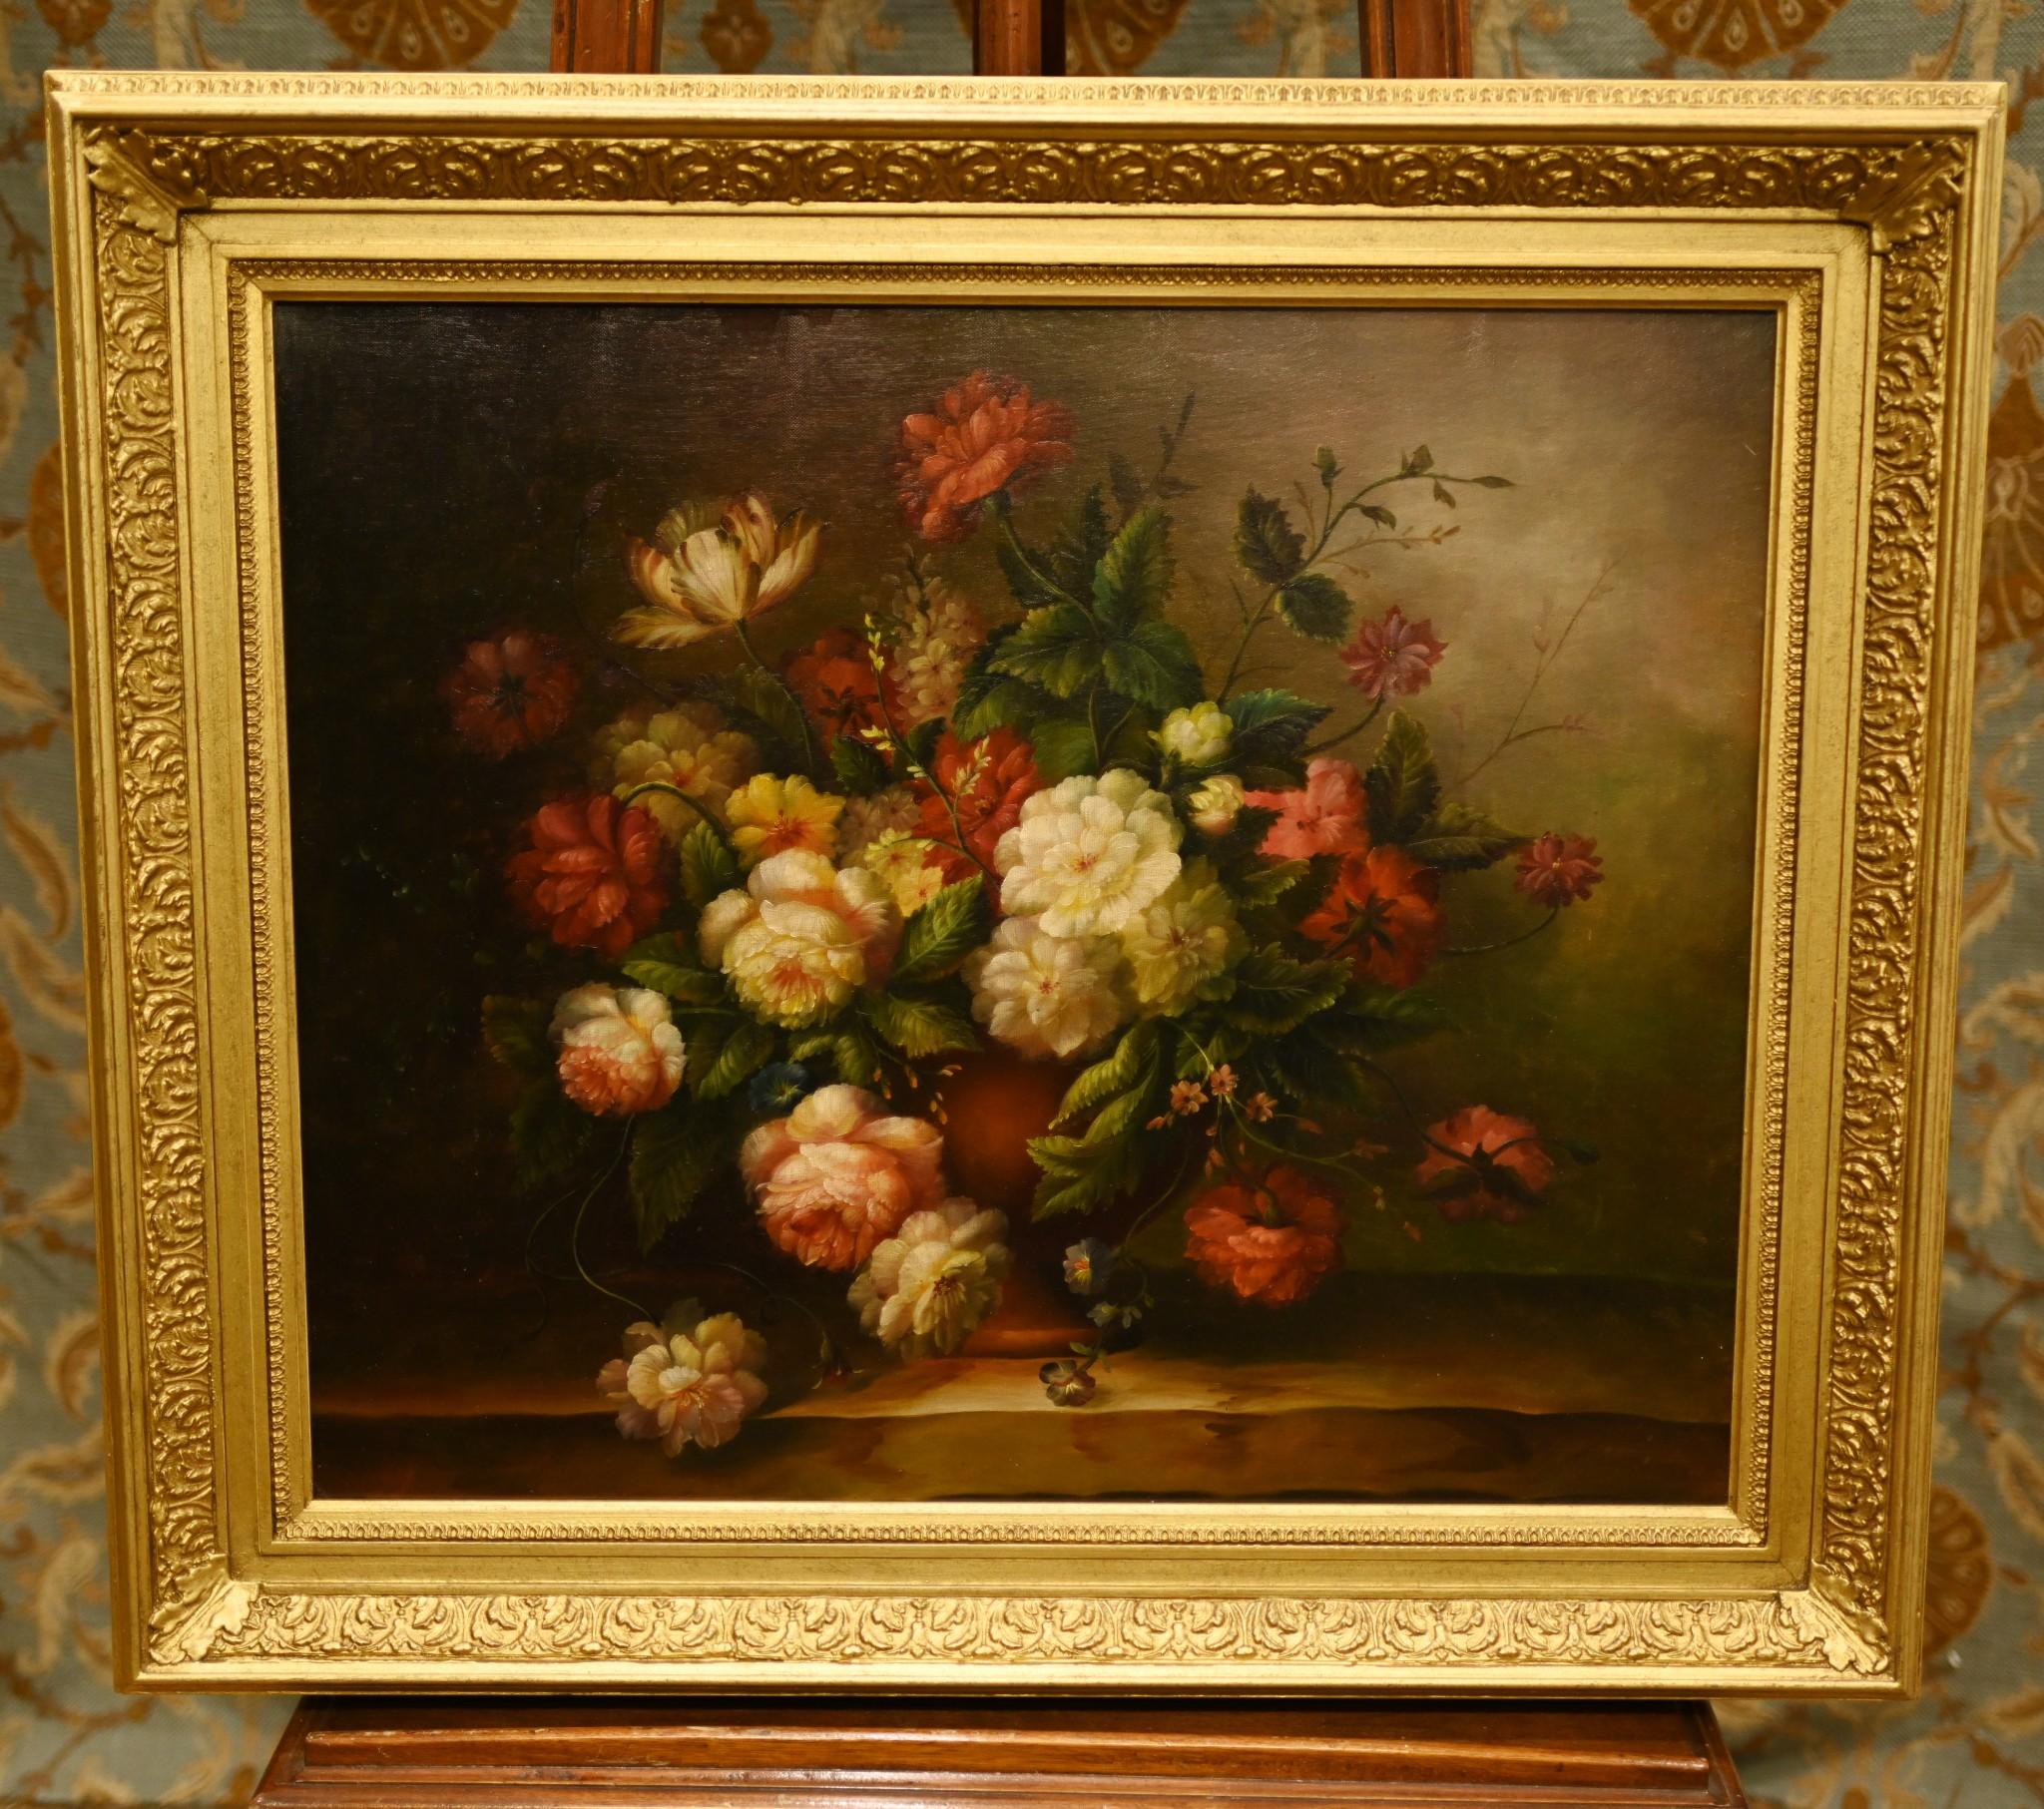 Gorgeous vivid English still life oil painting of a roses and other flowers in an arrangement
Such a bright piece, this will add light and verve to any room
Definitely the work of a very skilled artist, look at the detail to the brushwork and the